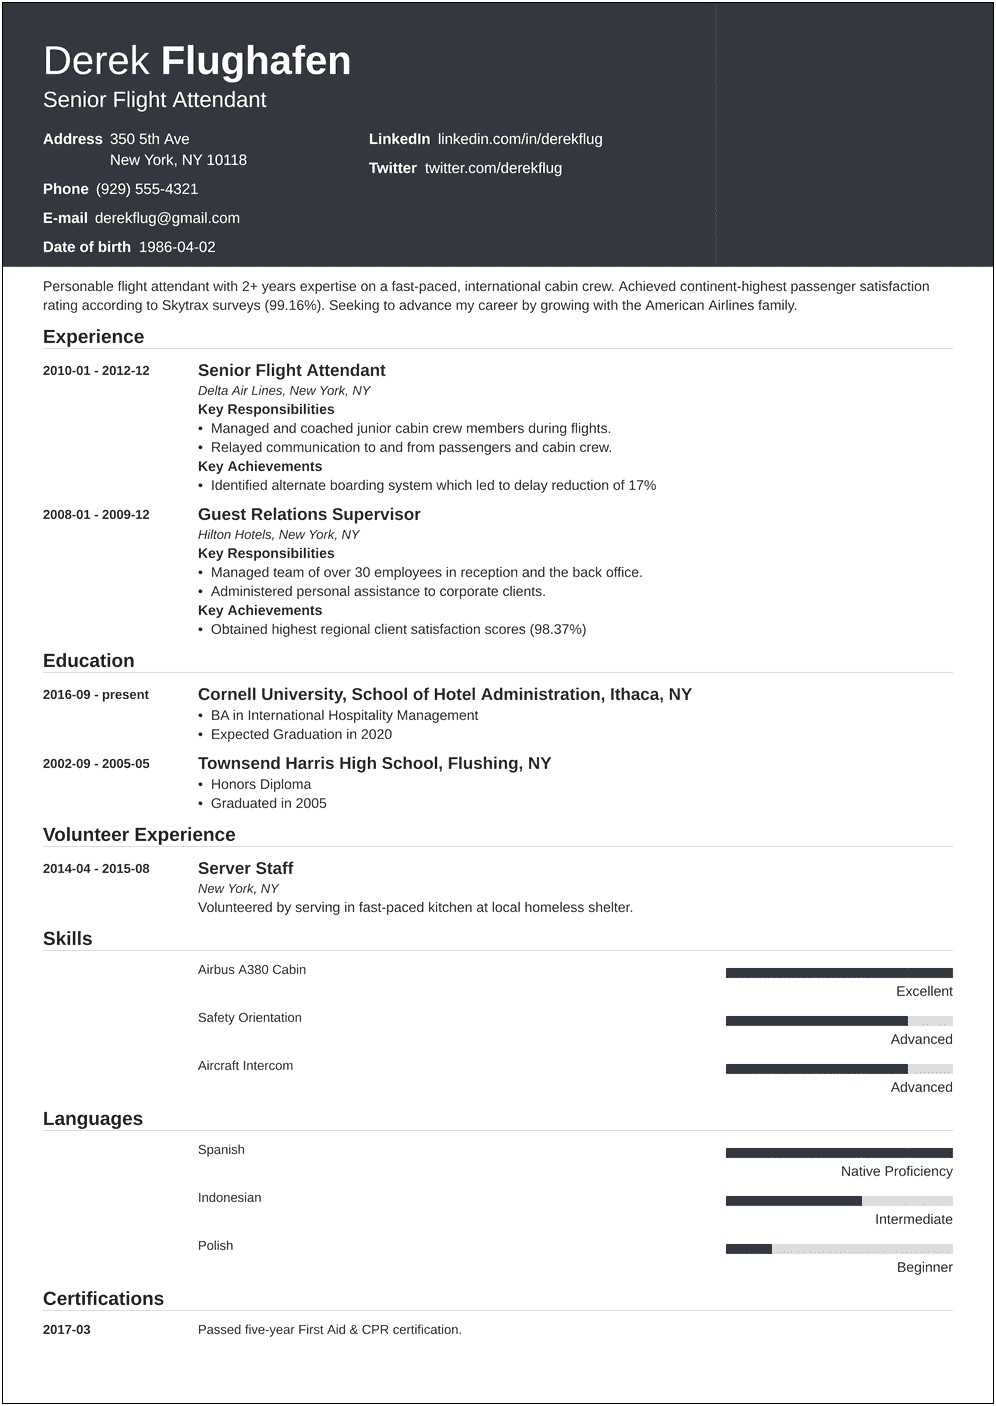 Resume Objective Examples For Flight Attendant